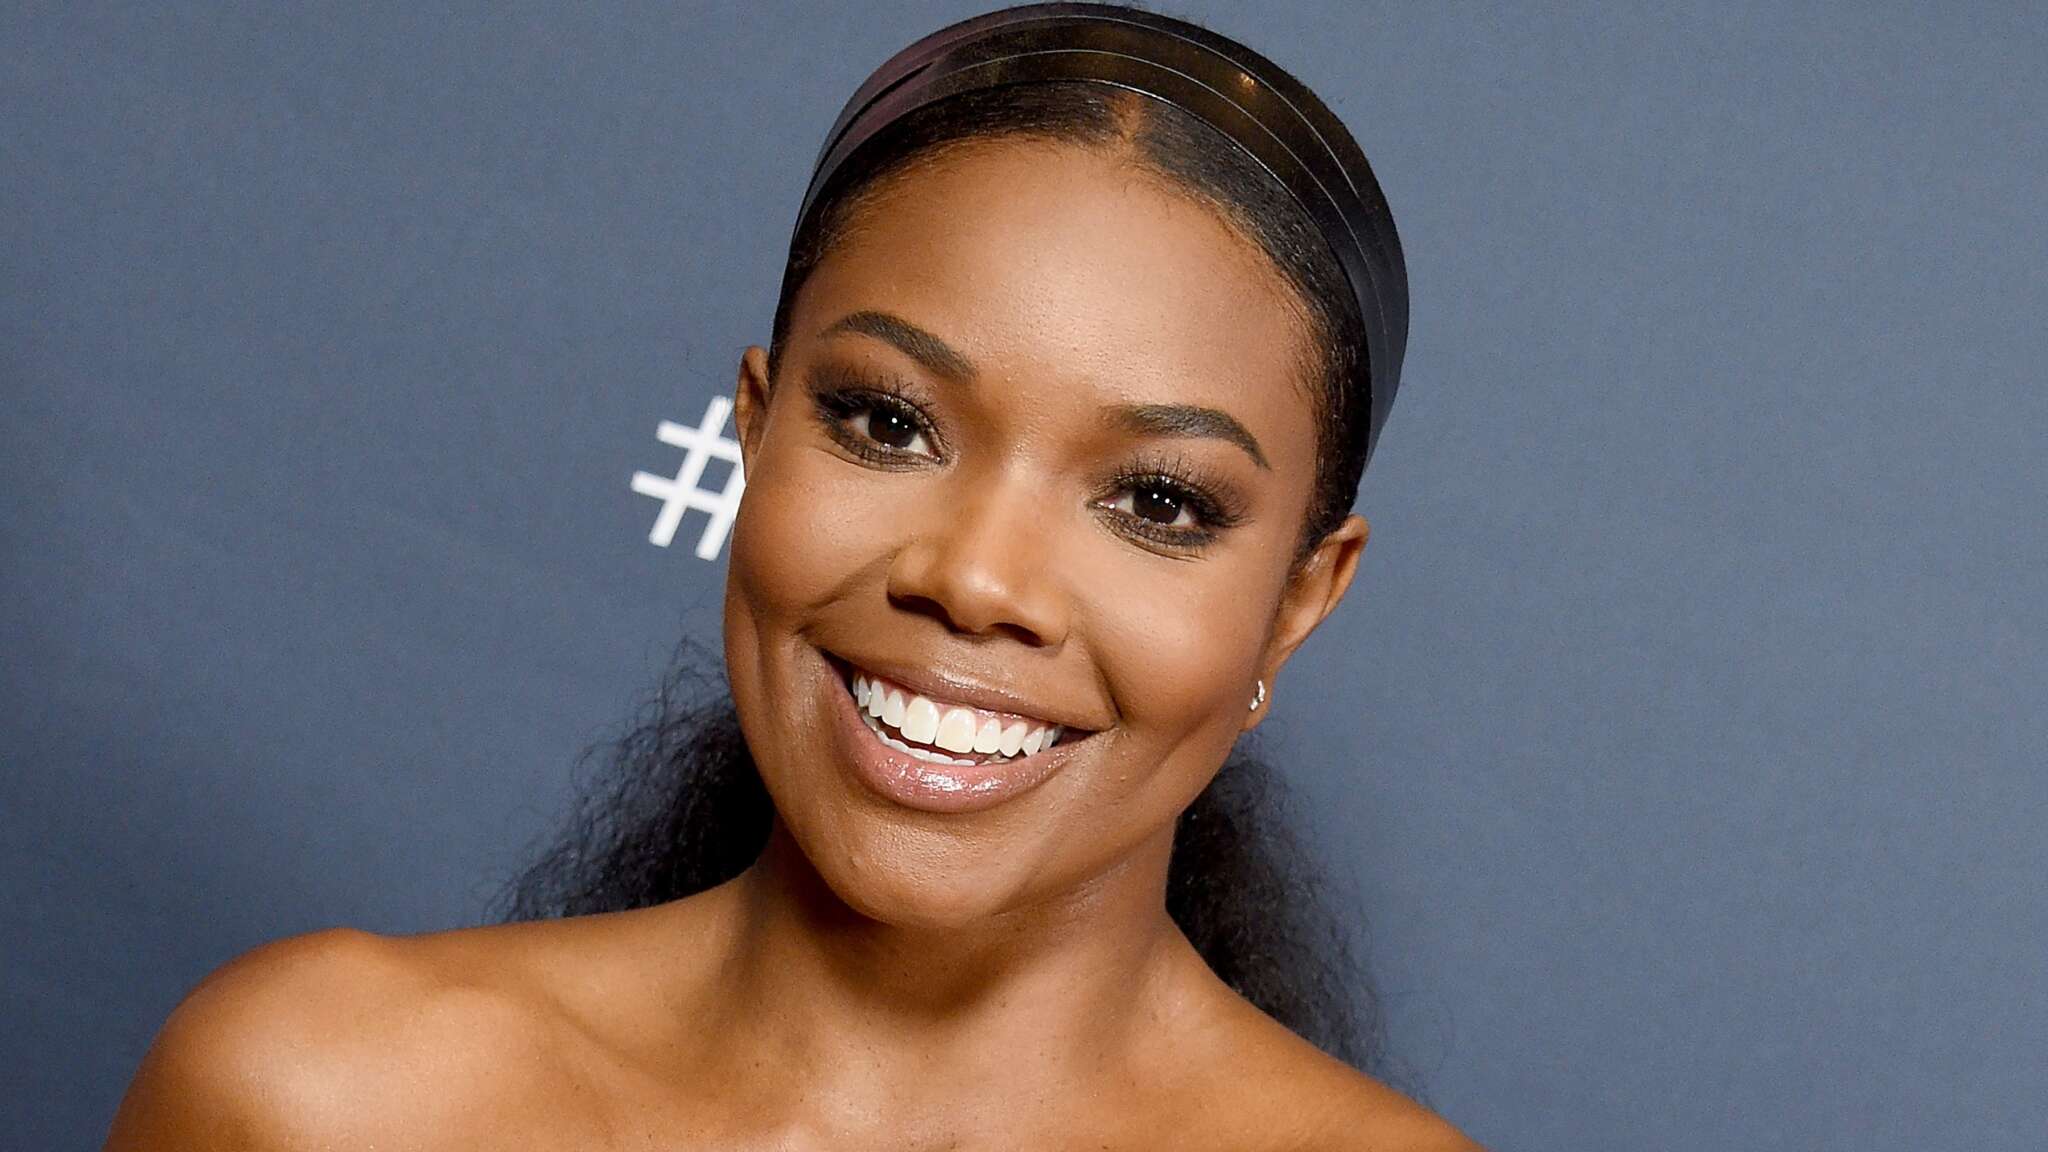 Gabrielle Union Looks Gorgeous In This Outfit - See Her Look Here